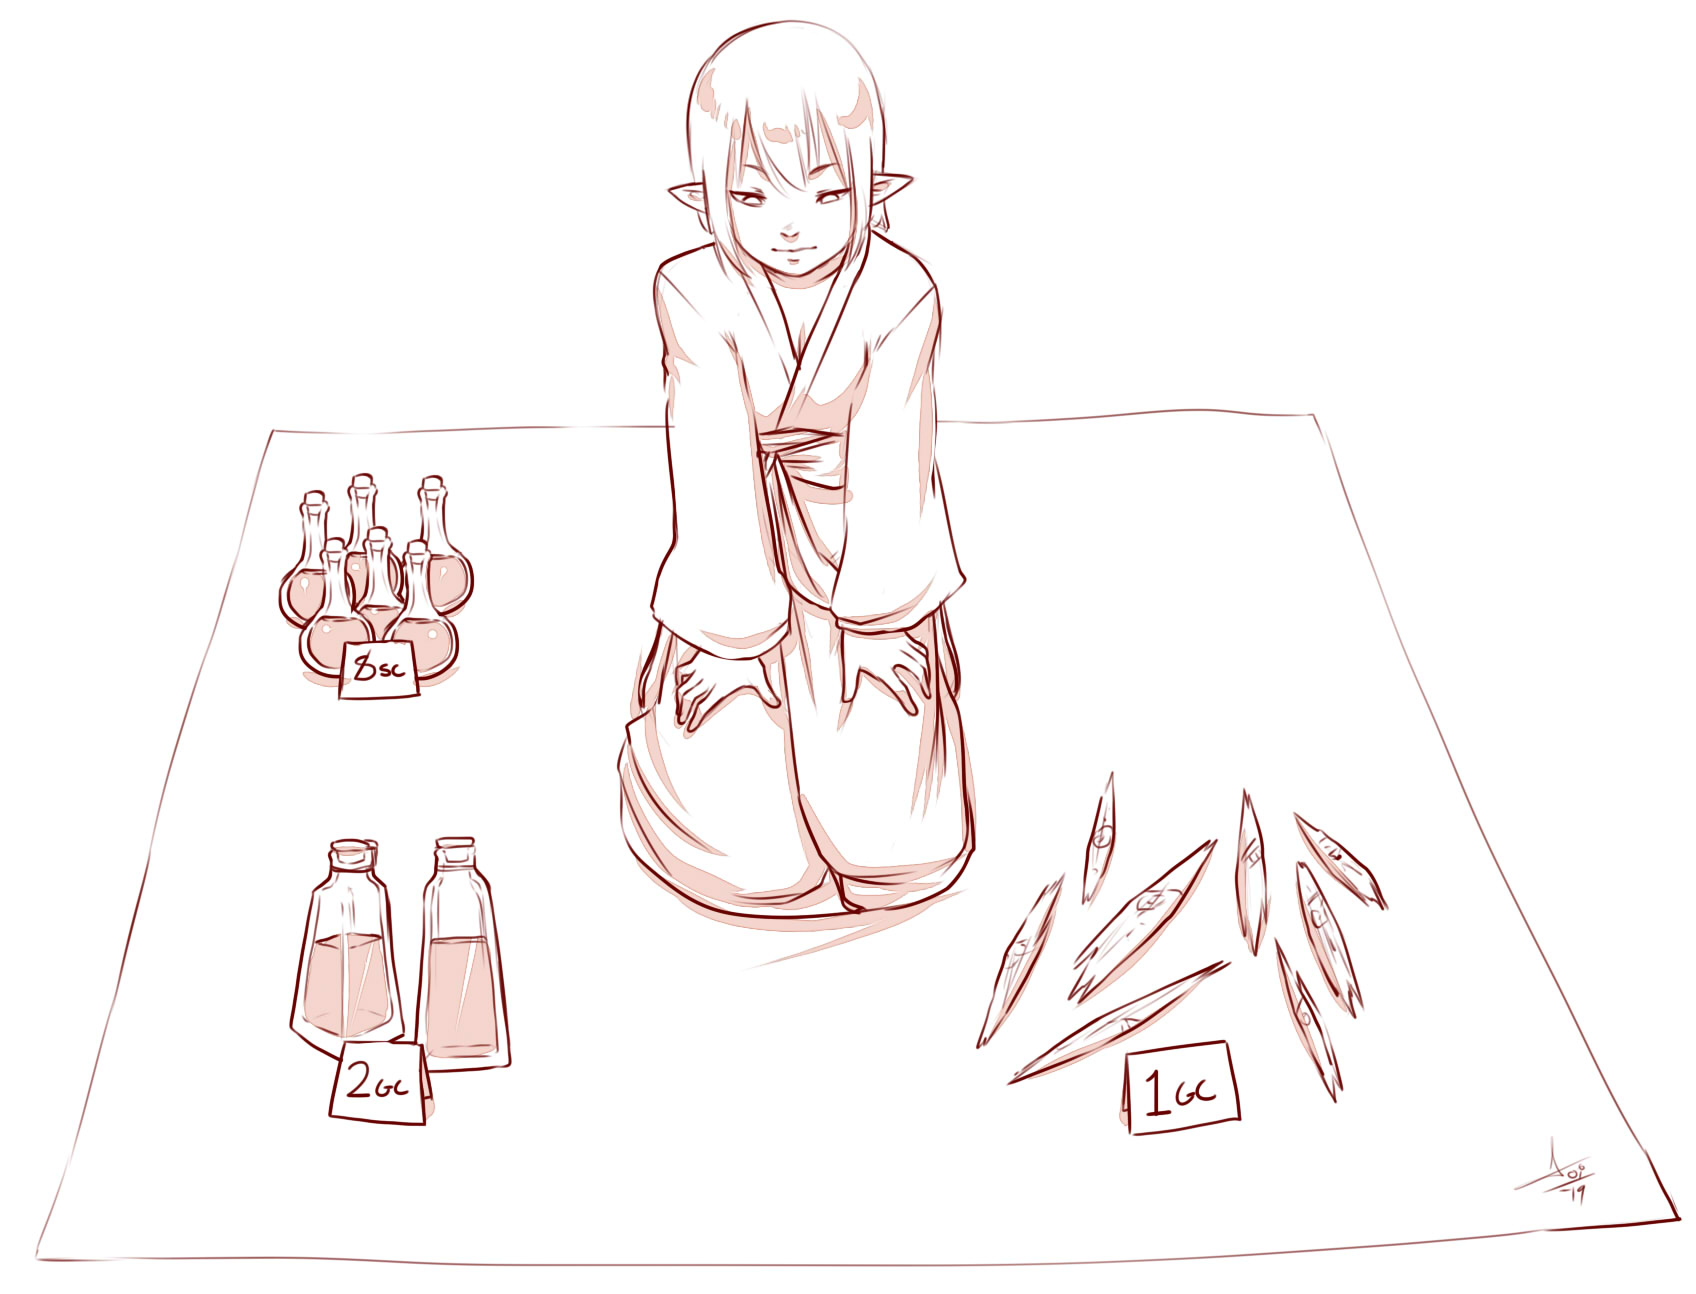 Ila selling various potions and twigs